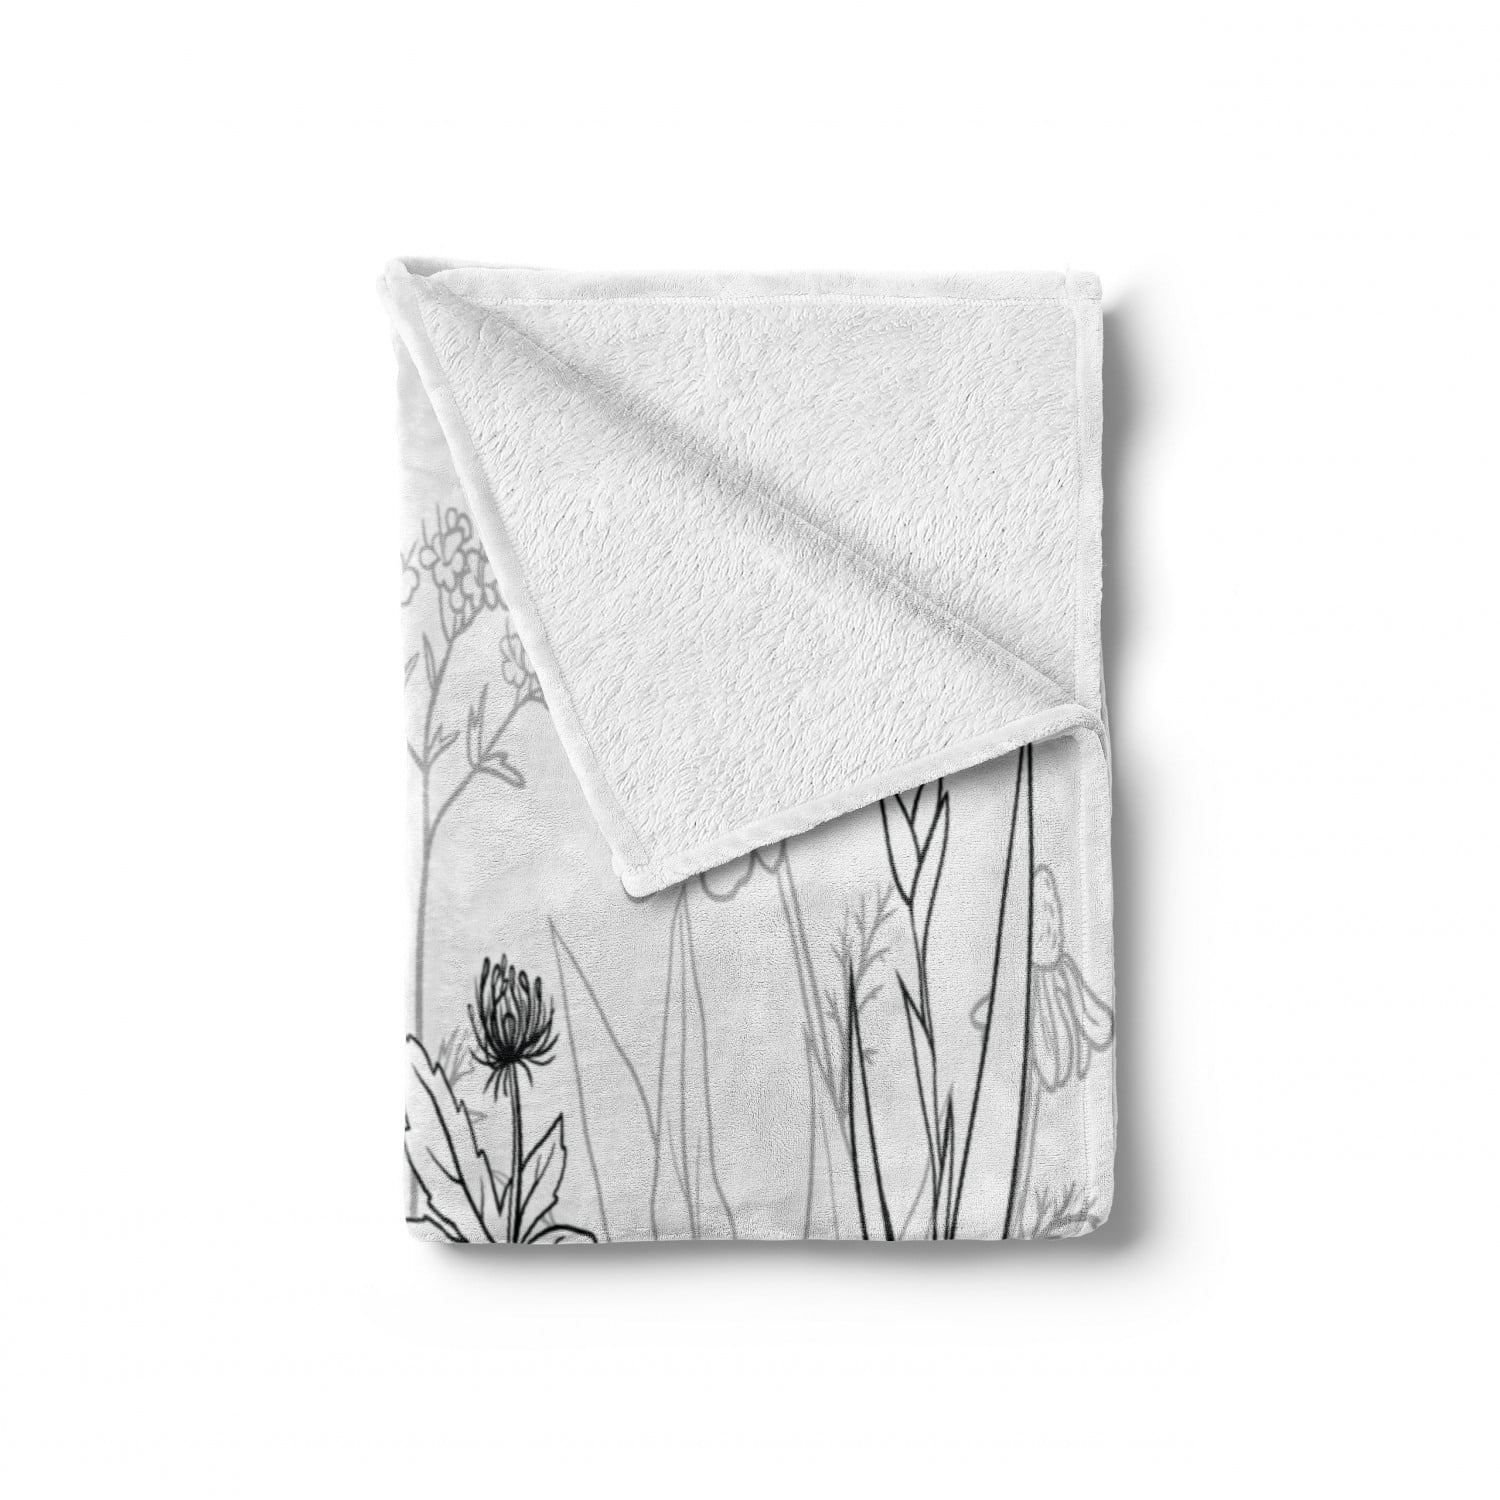 Ambesonne Thistle Soft Flannel Fleece Throw Blanket Pale Grey White 50 x 60 Cozy Plush for Indoor and Outdoor Use Botanical and Herbs Pattern as Silhouette Wildflowers Print 